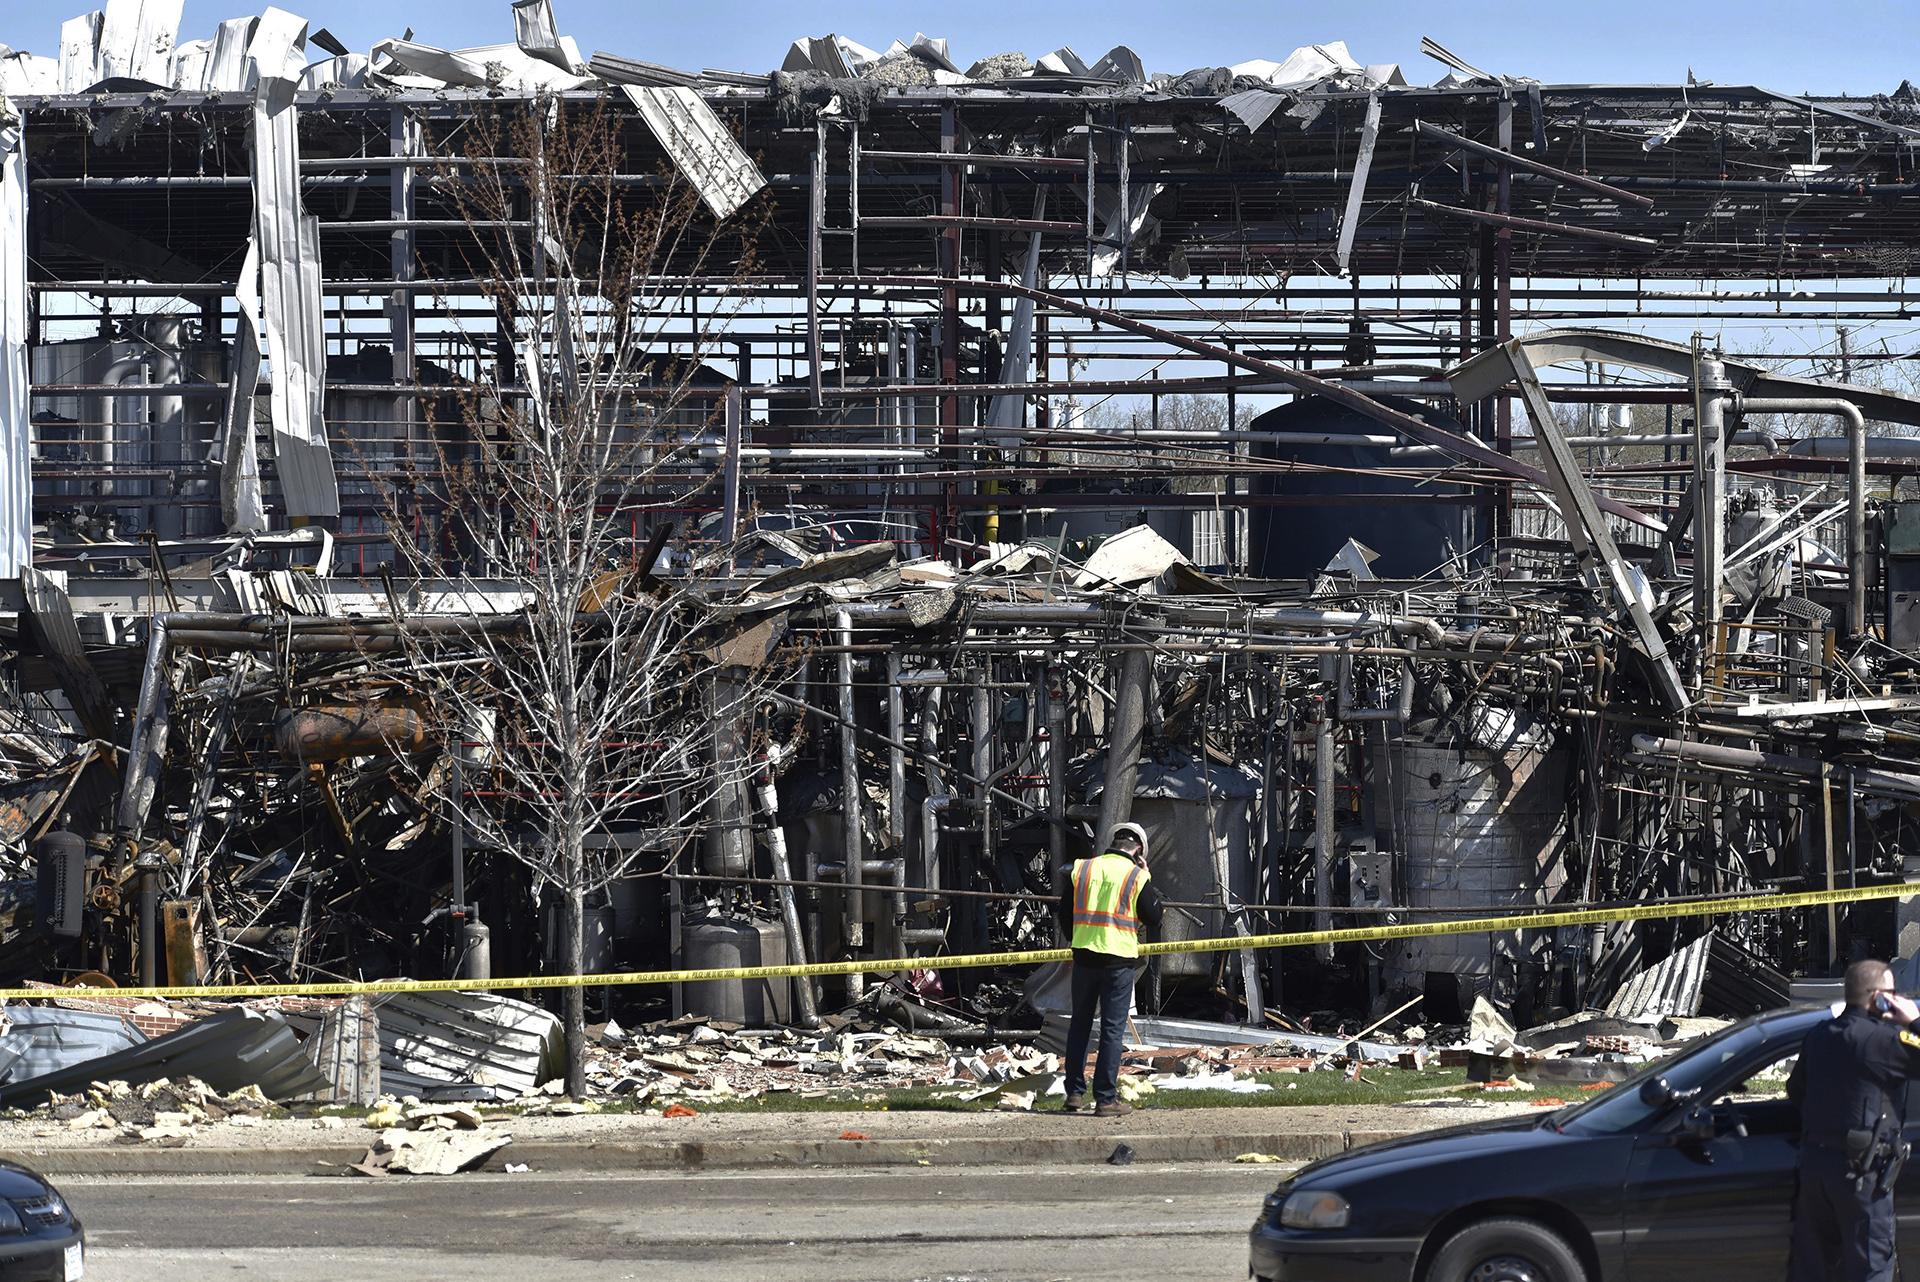 Emergency personnel work at the scene of an explosion at AB Specialty Silicones on Sunset Ave. and Northwestern Ave. on the border between Gurnee and Waukegan. The explosion happened Friday, May 3. (John Starks / Daily Herald via AP)